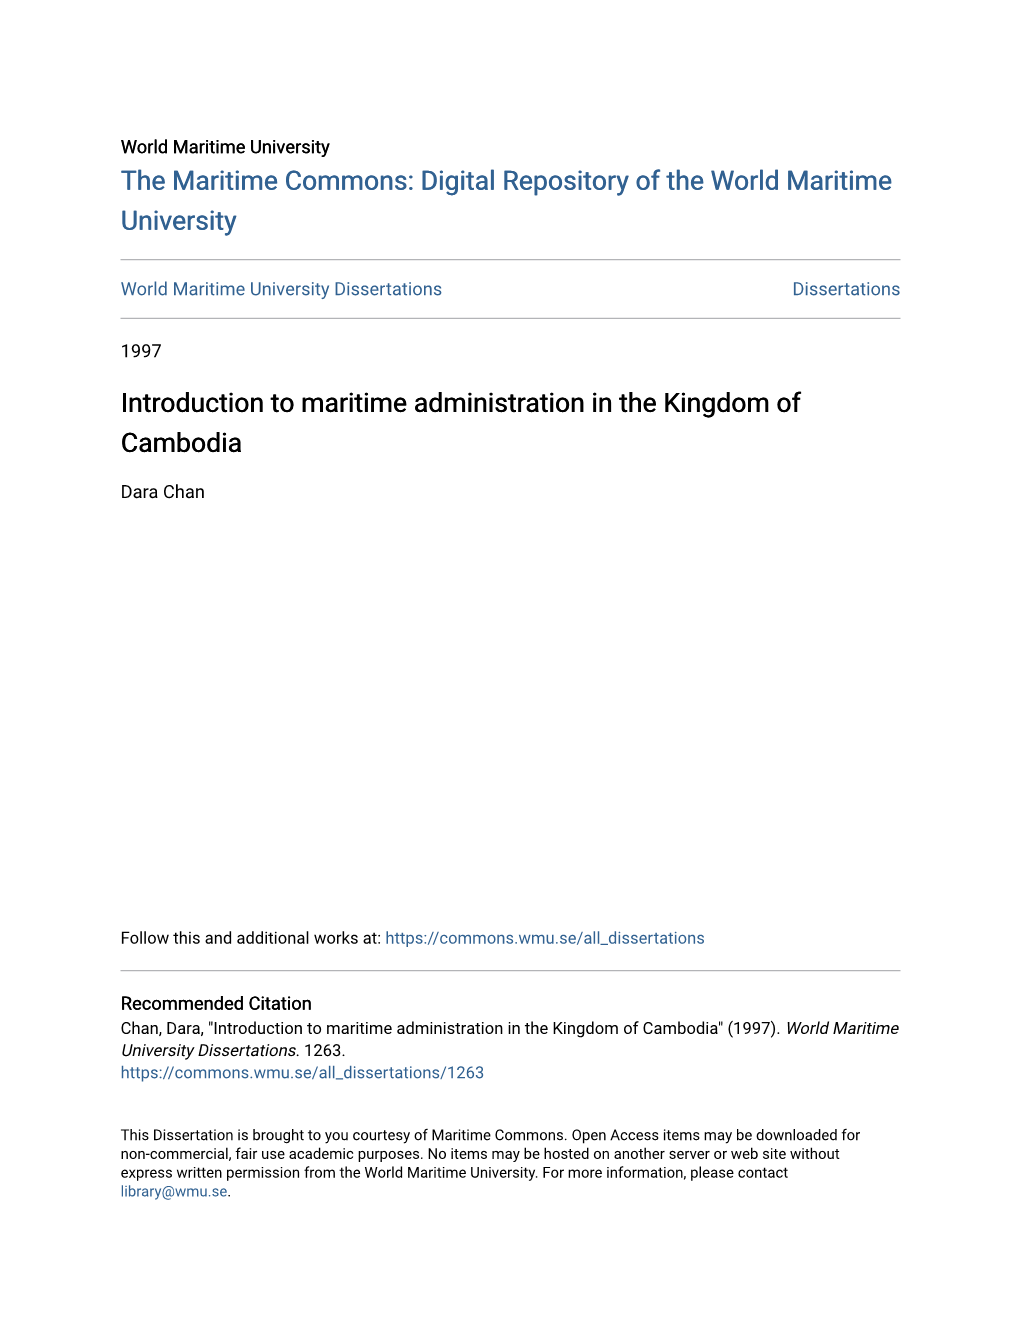 Introduction to Maritime Administration in the Kingdom of Cambodia